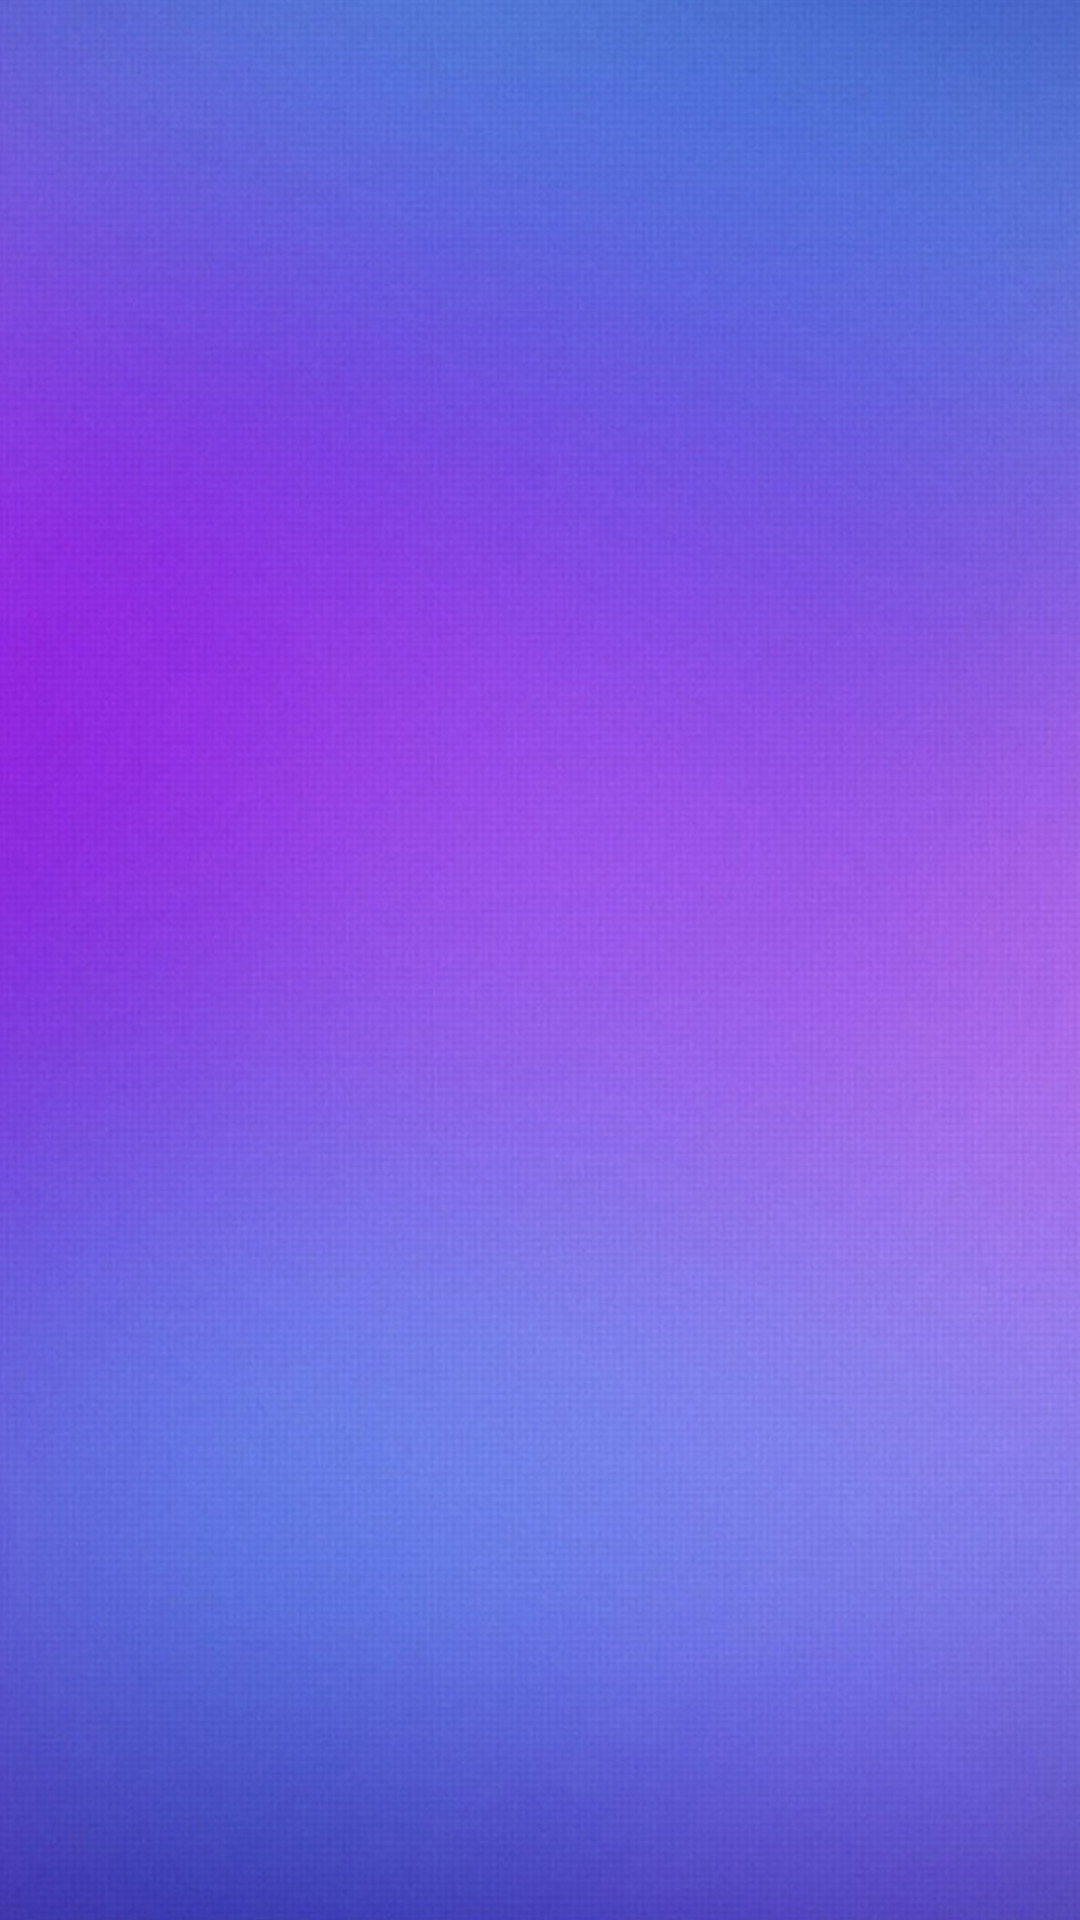 Colorful 37 Android wallpaper